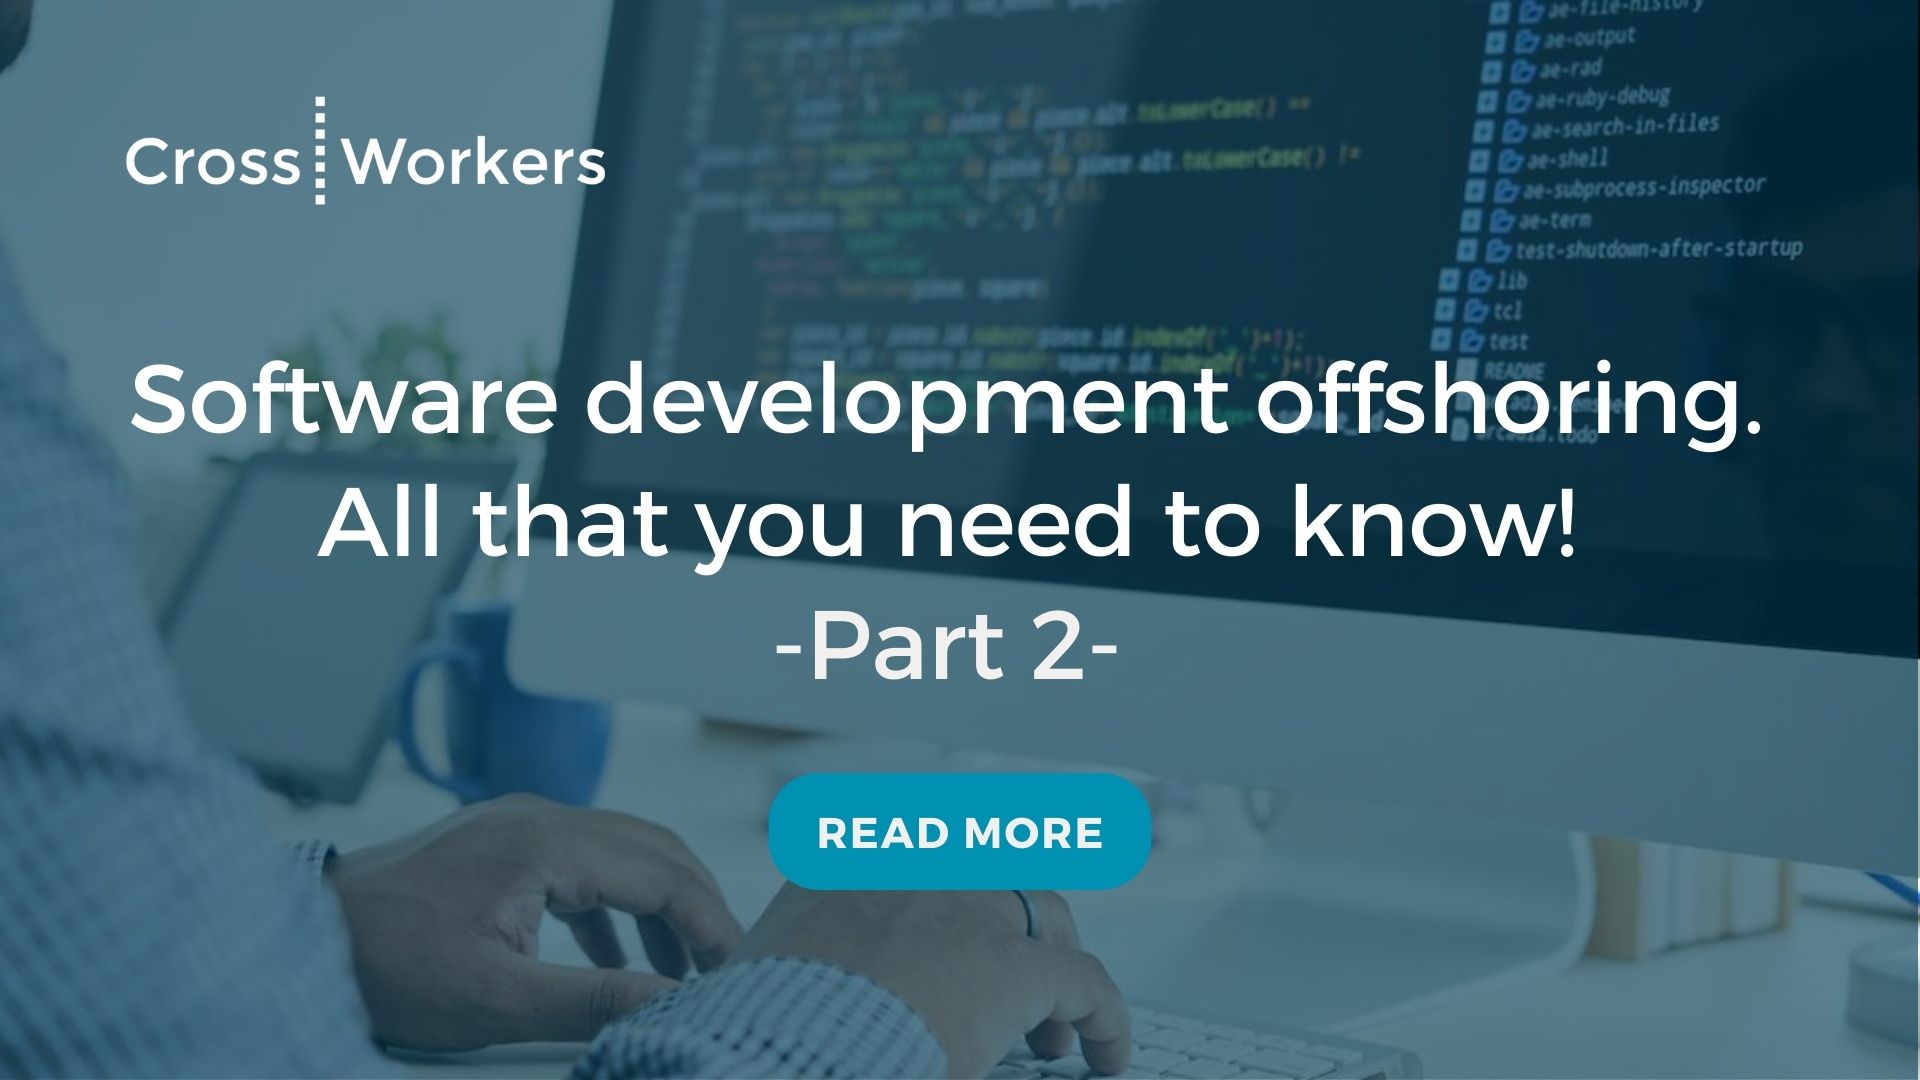 Software development offshoring. All that you need to know! Part 2